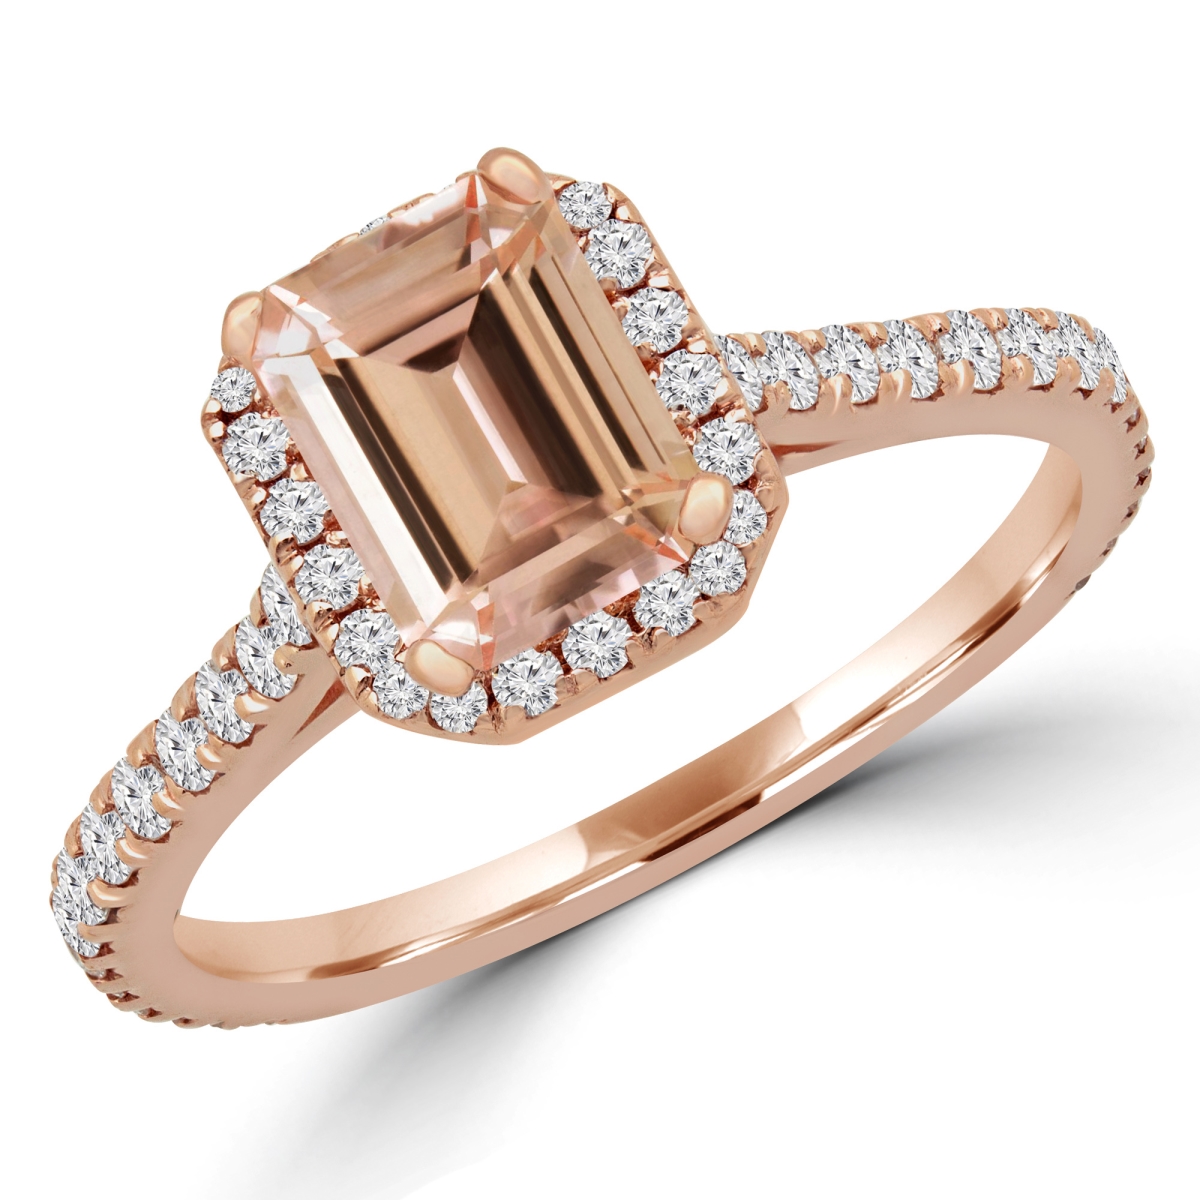 Picture of Majesty Diamonds MD180580-3 1.25 CTW Emerald Pink Morganite Halo Engagement Ring in 14K Rose Gold - Size 3